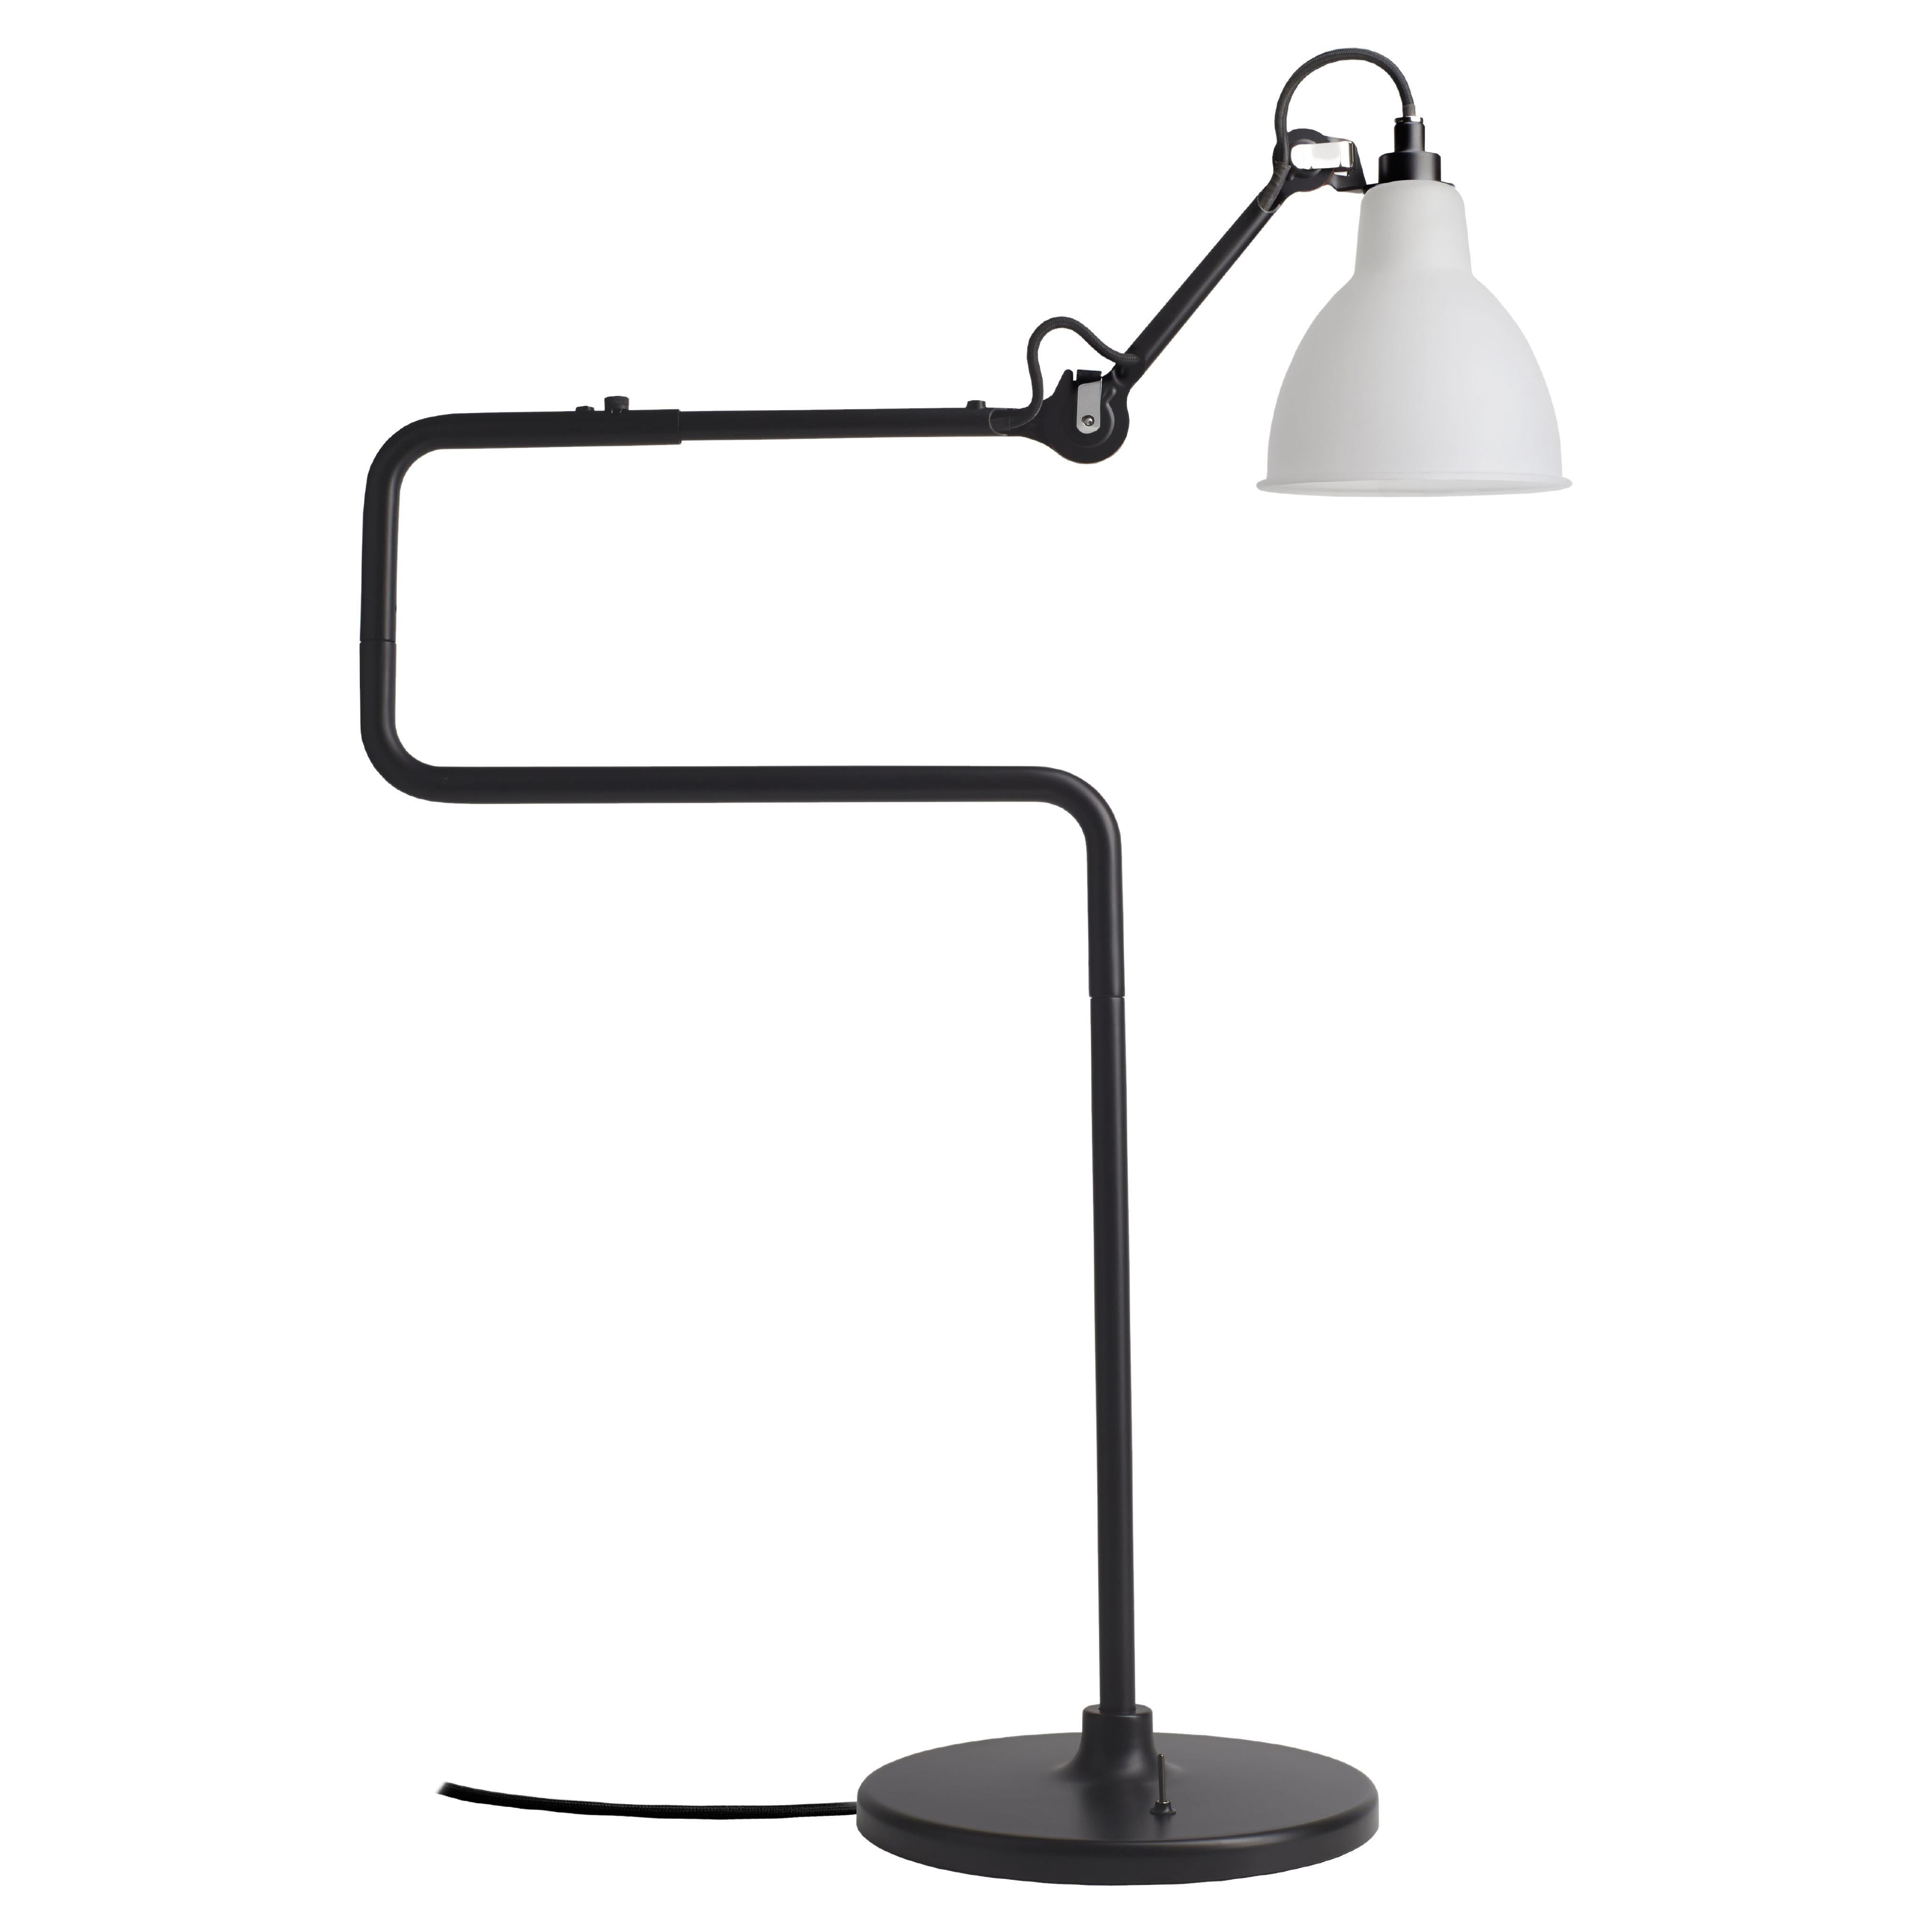 DCW Editions La Lampe Gras N°317 Table Lamp in Black Arm & Frosted Glass Shade For Sale